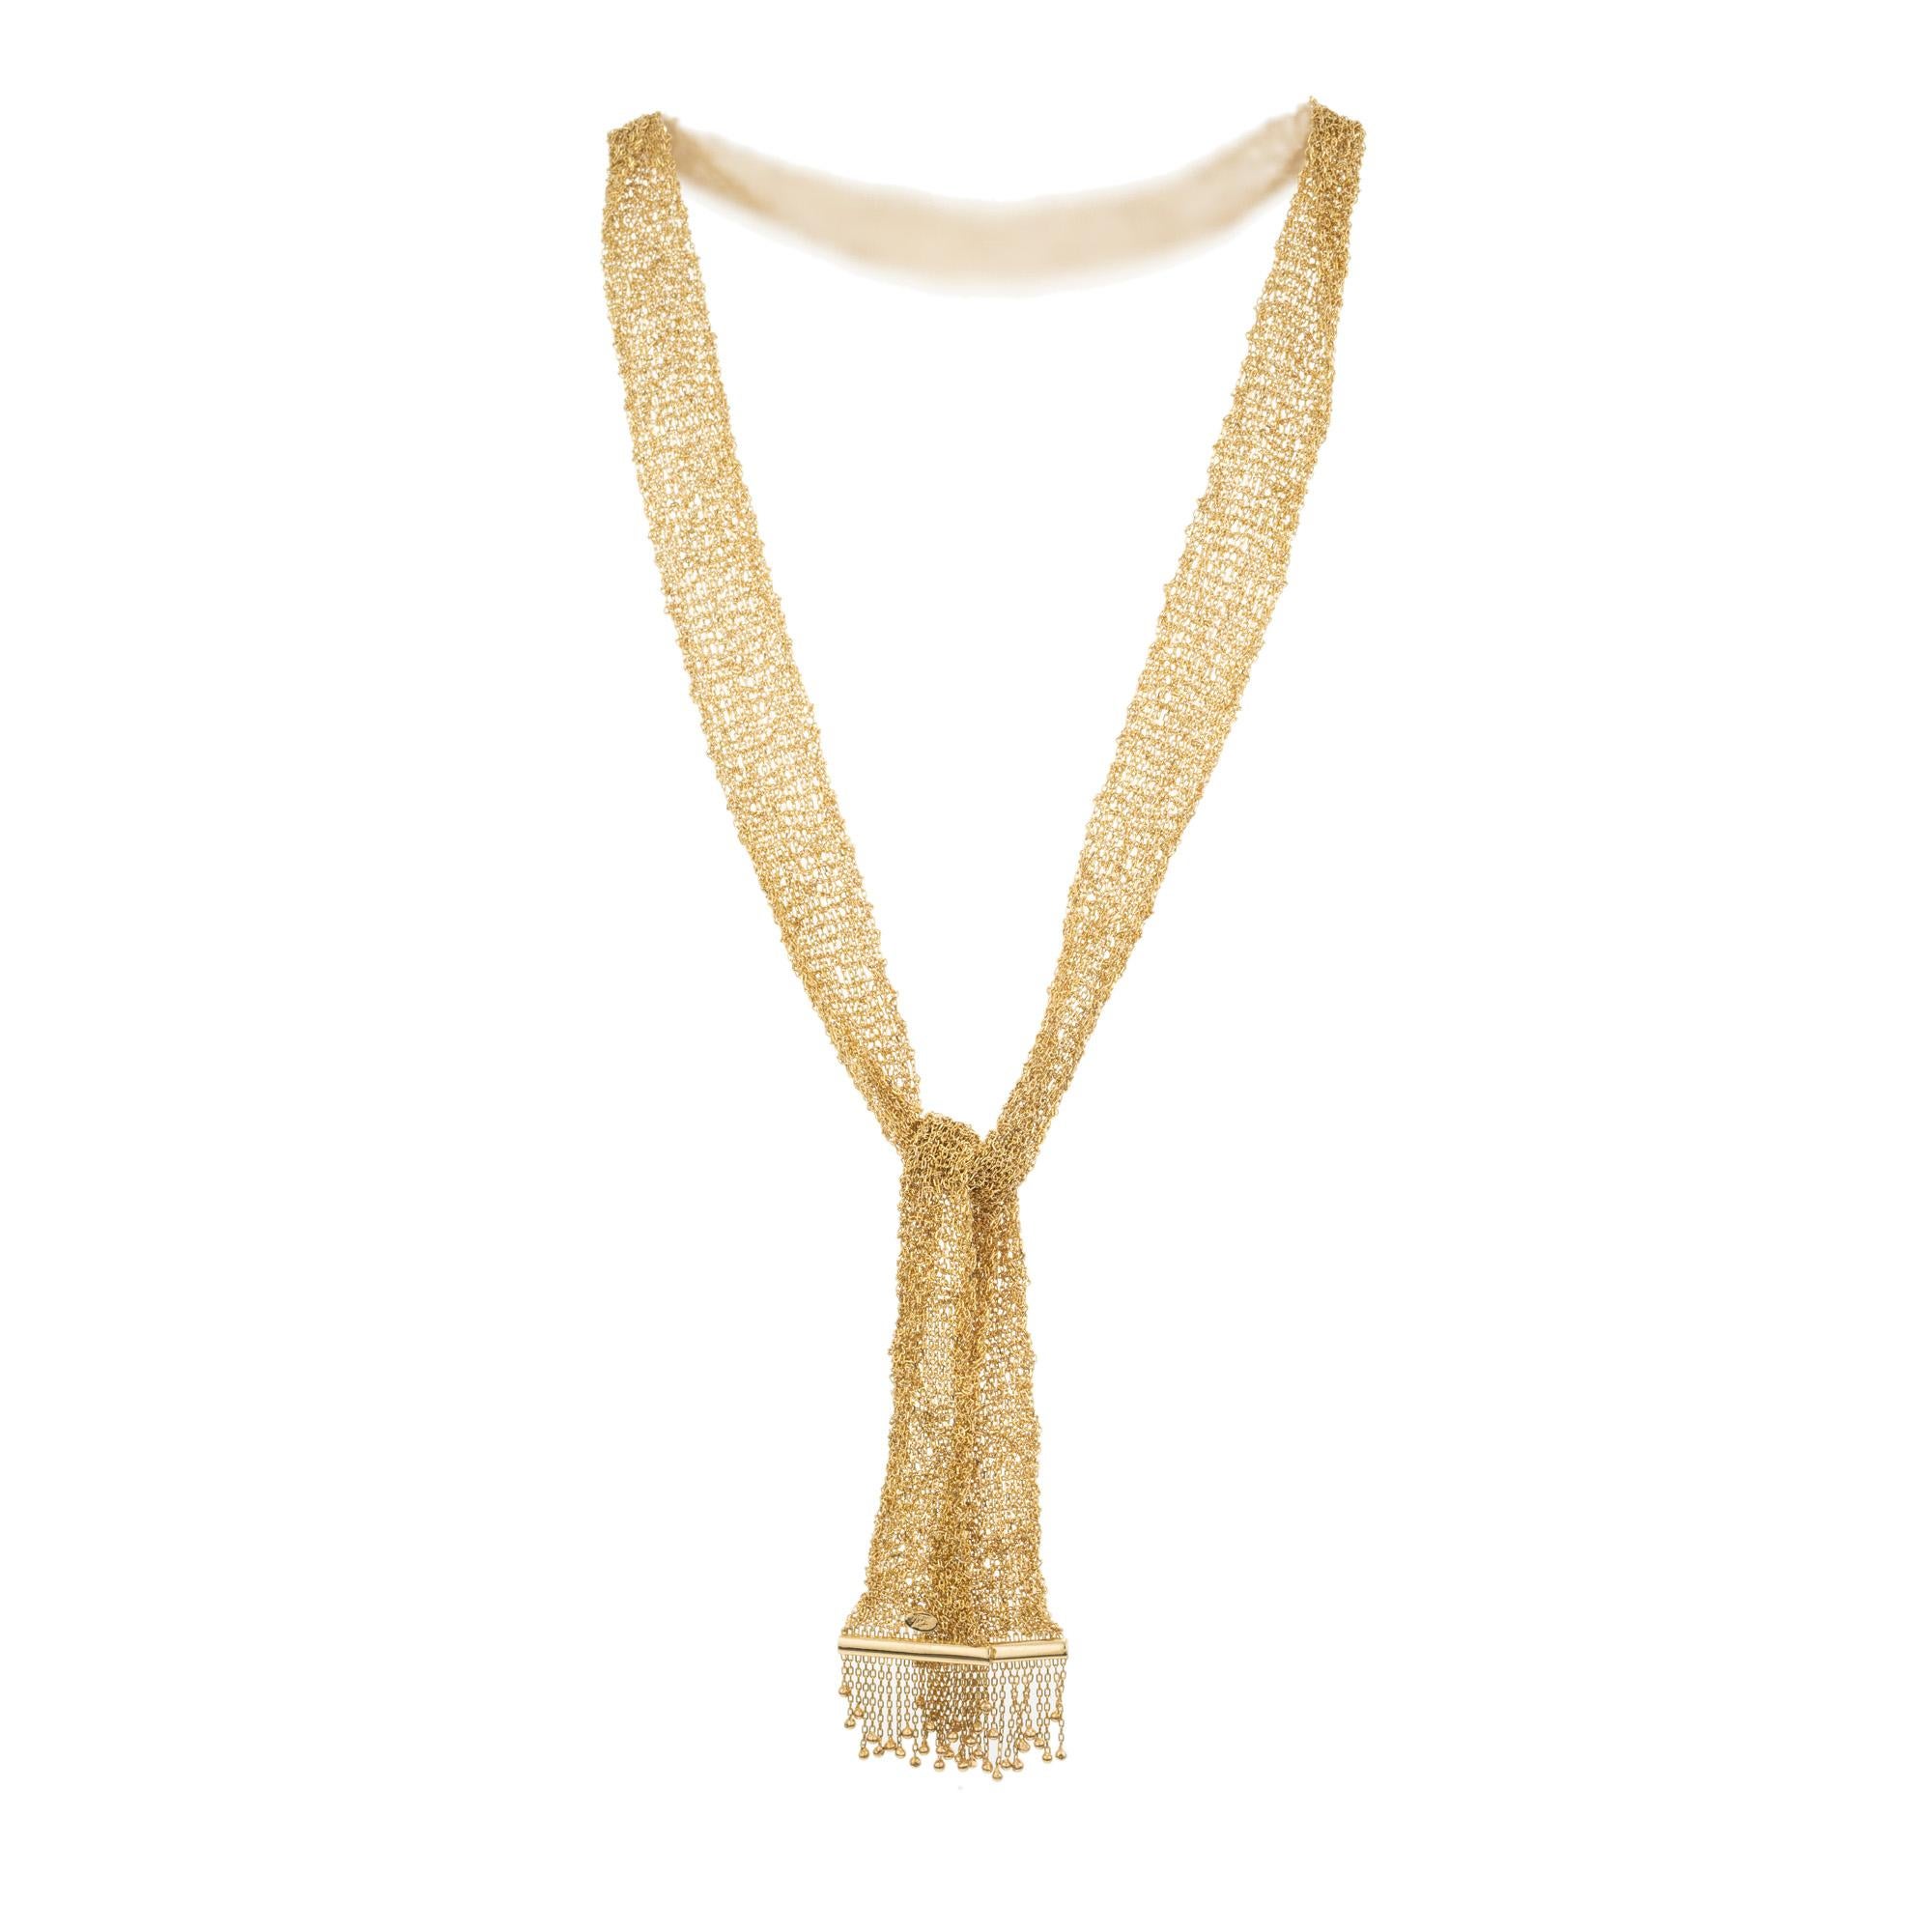 Unique and stunning 14k yellow gold tassel necklace. Wonderfully rich golden color and sparkle from every inch of this .27 Inch long and 2.83 inch wide mesh necklace made from multiple chains put together with a tassel ends. It can born at multiple